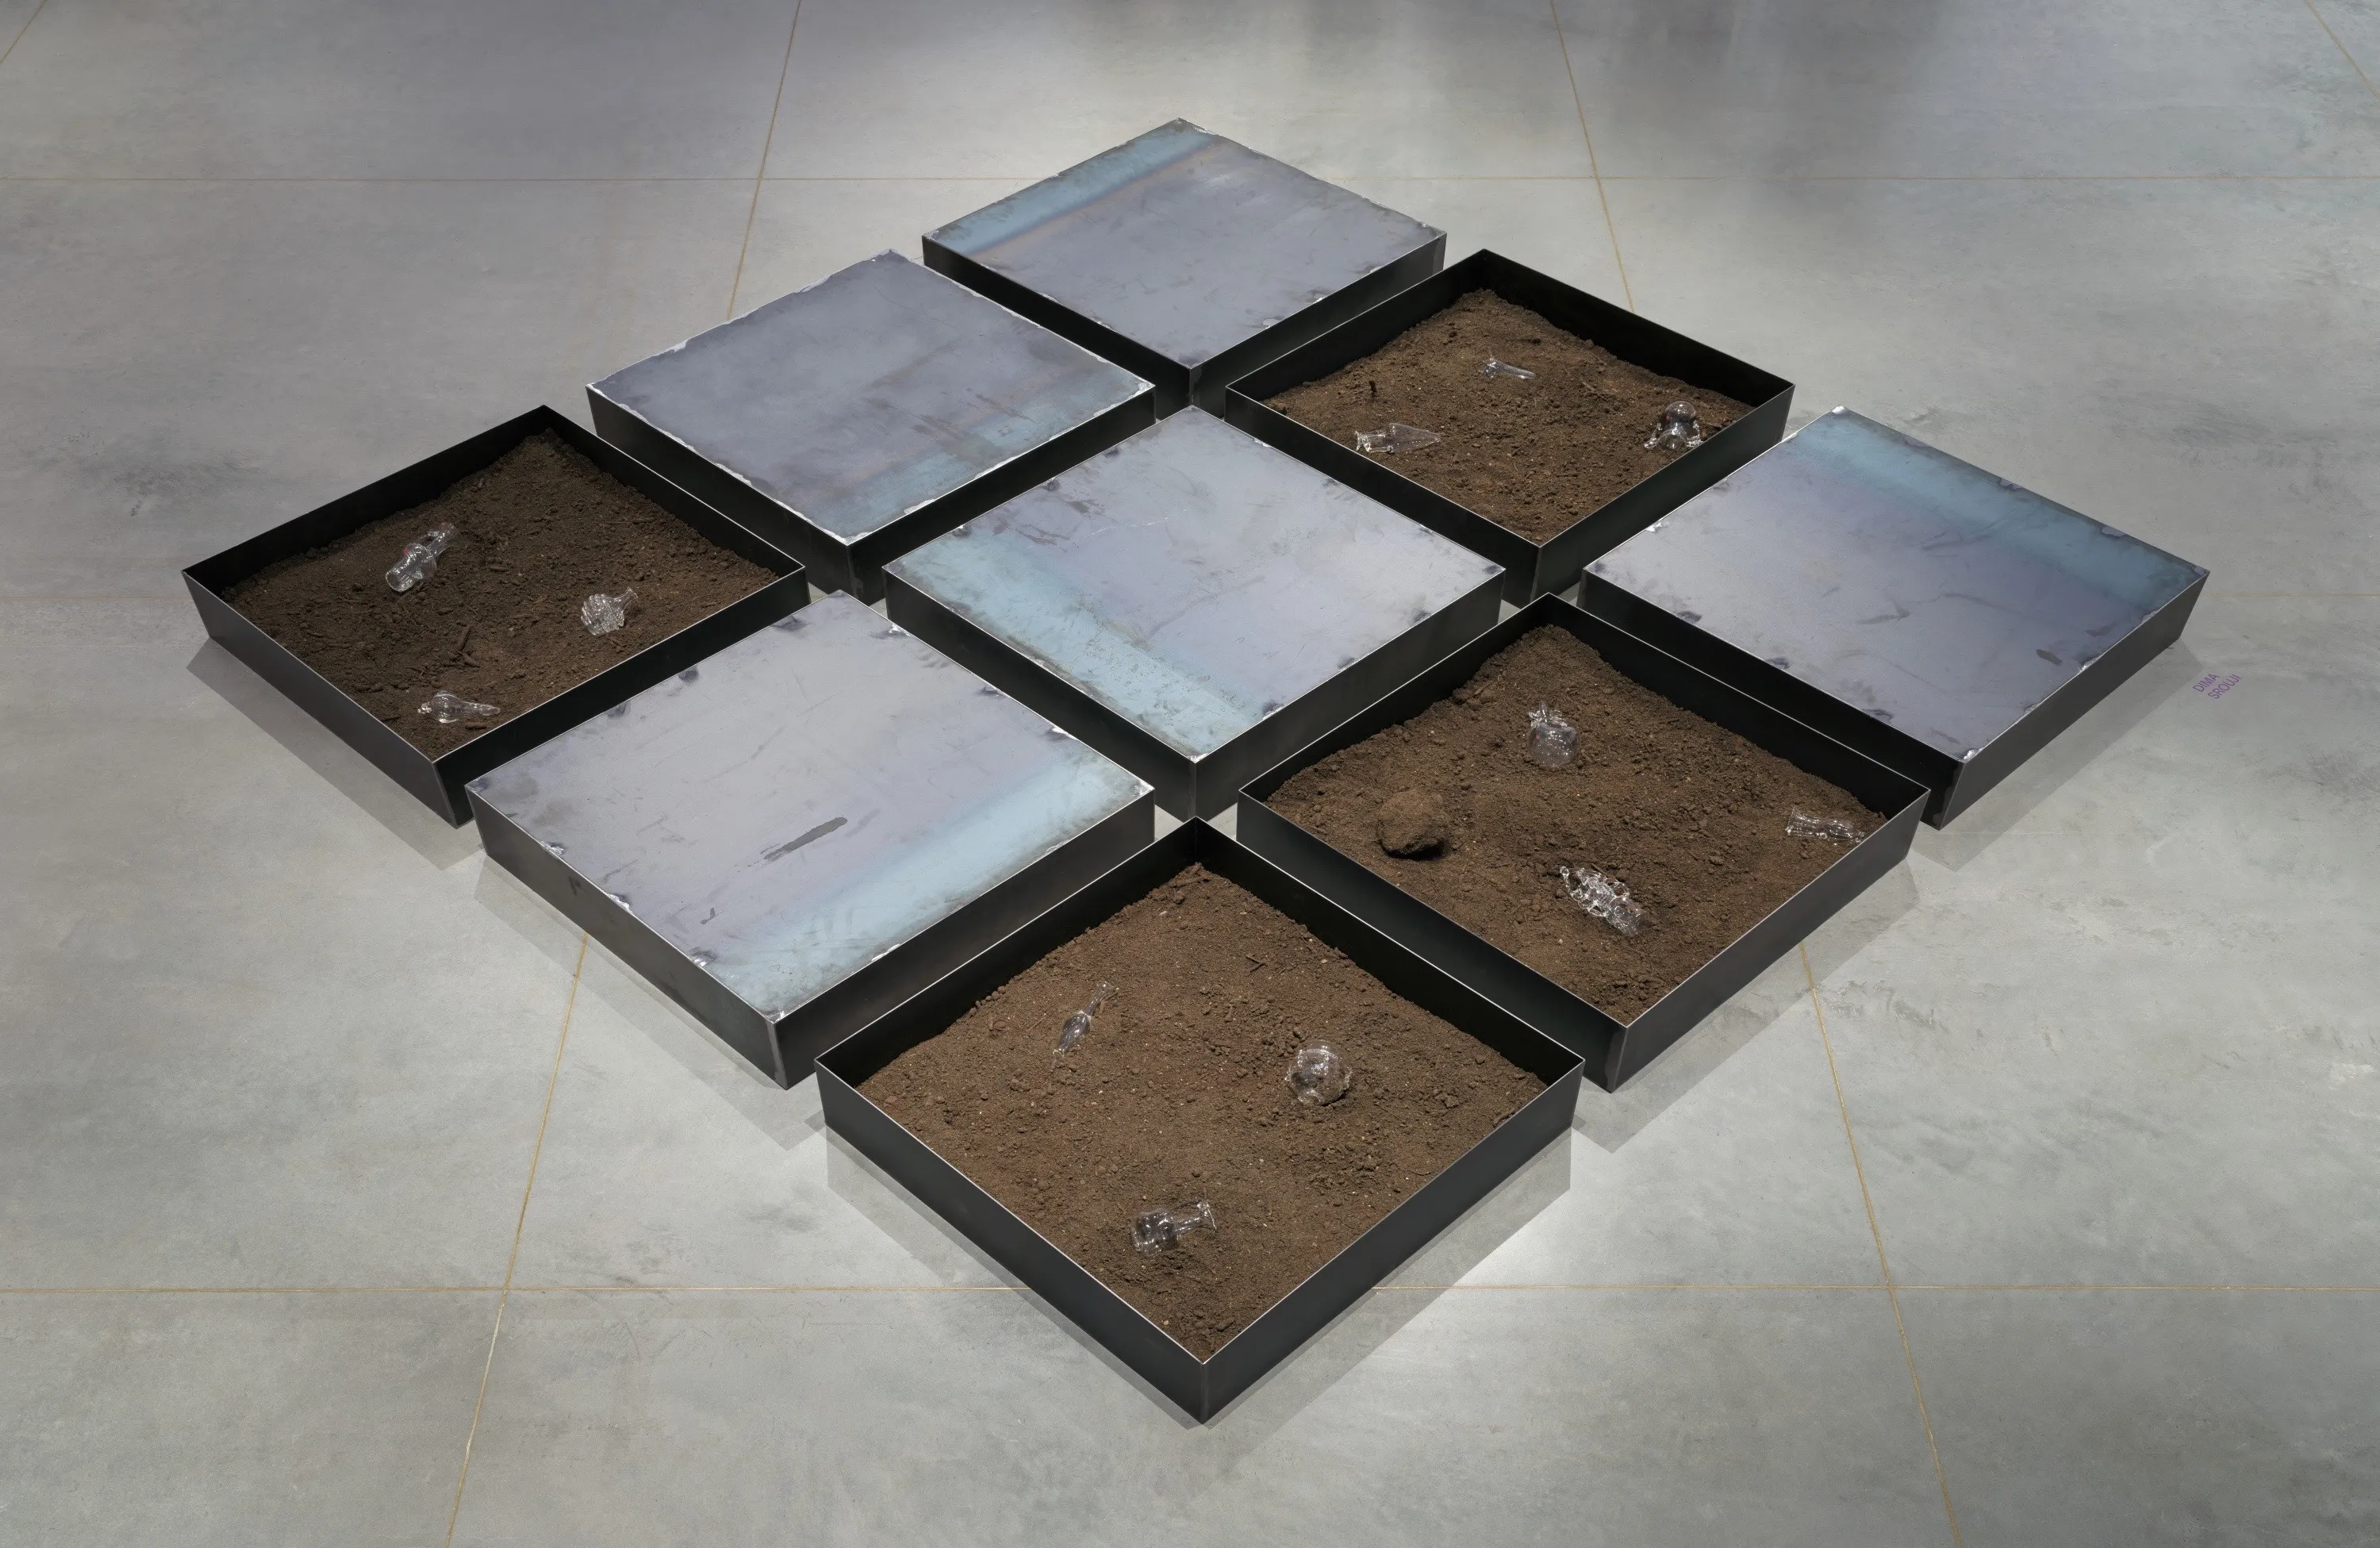 A three by three grid installation of large steel trays on the floor. Some trays are filled with dirt and glass vessels.